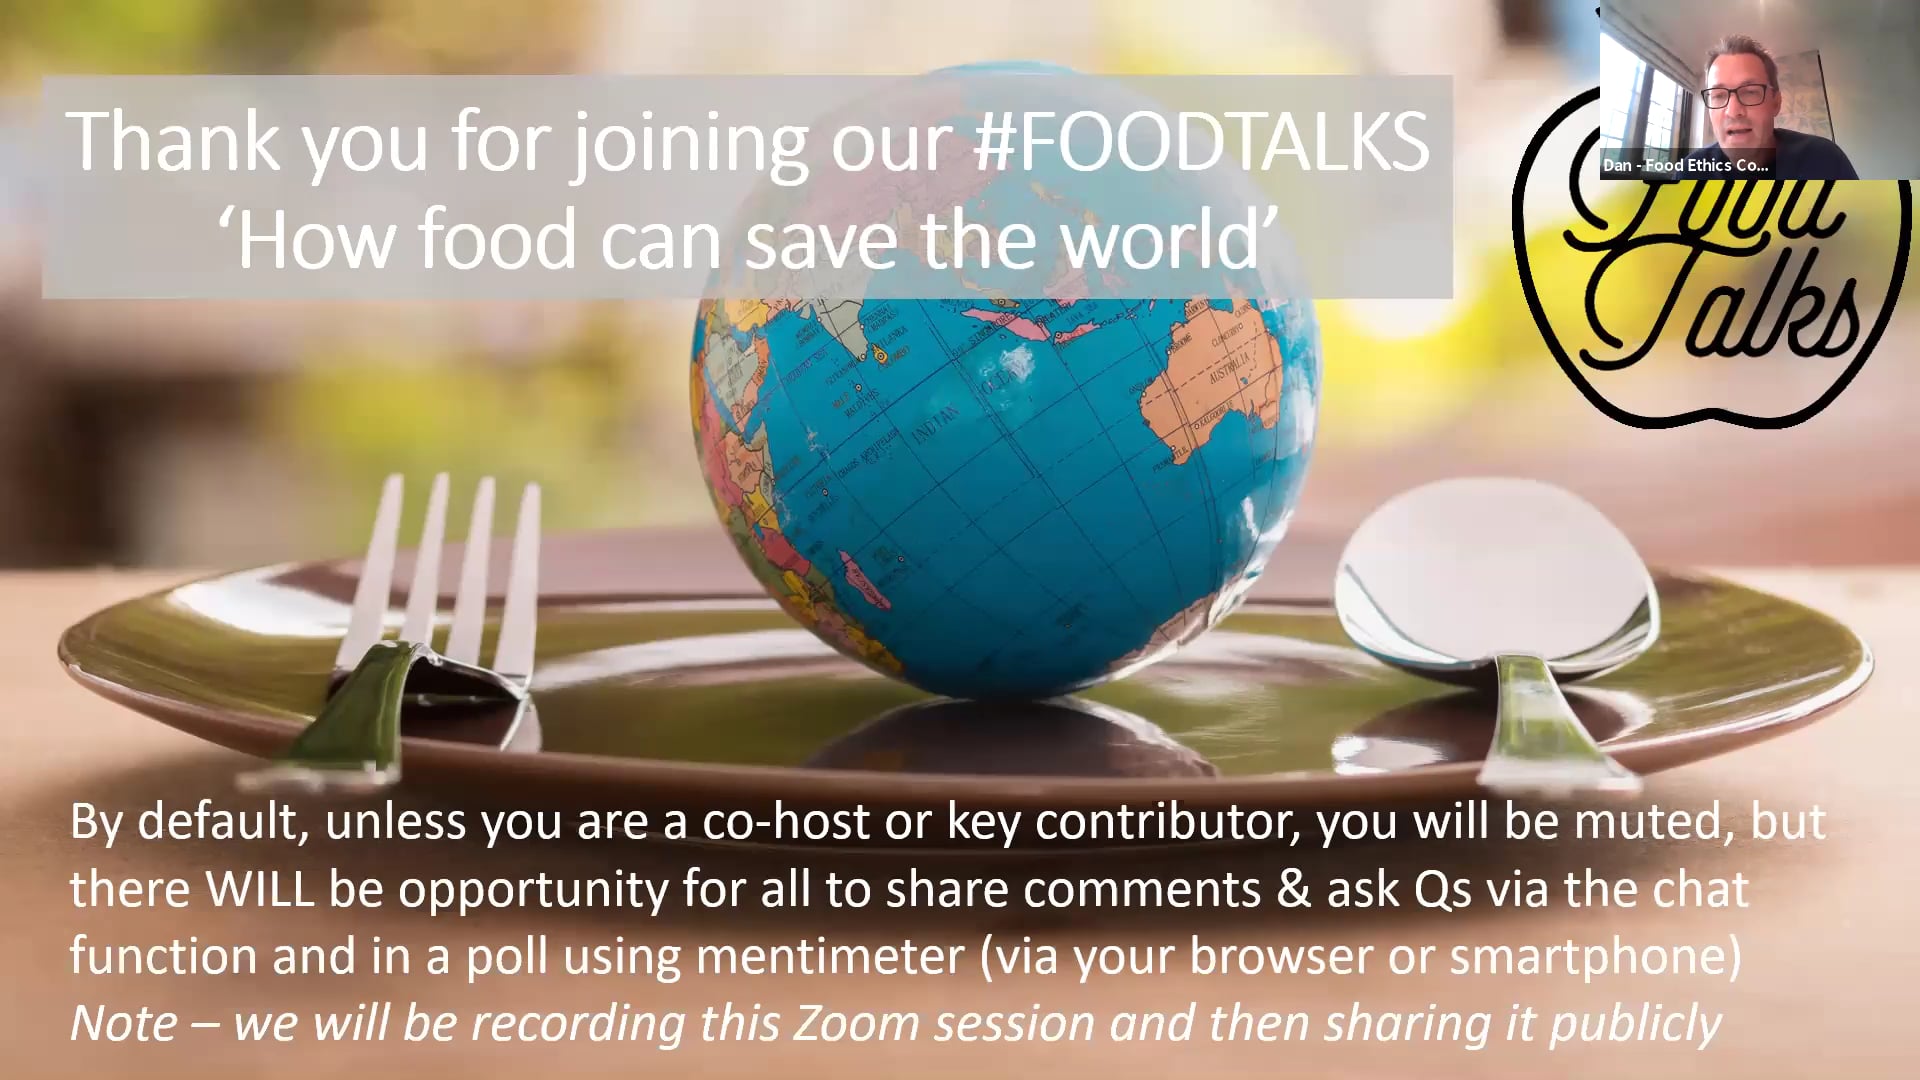 Food Talks - how food can save the world